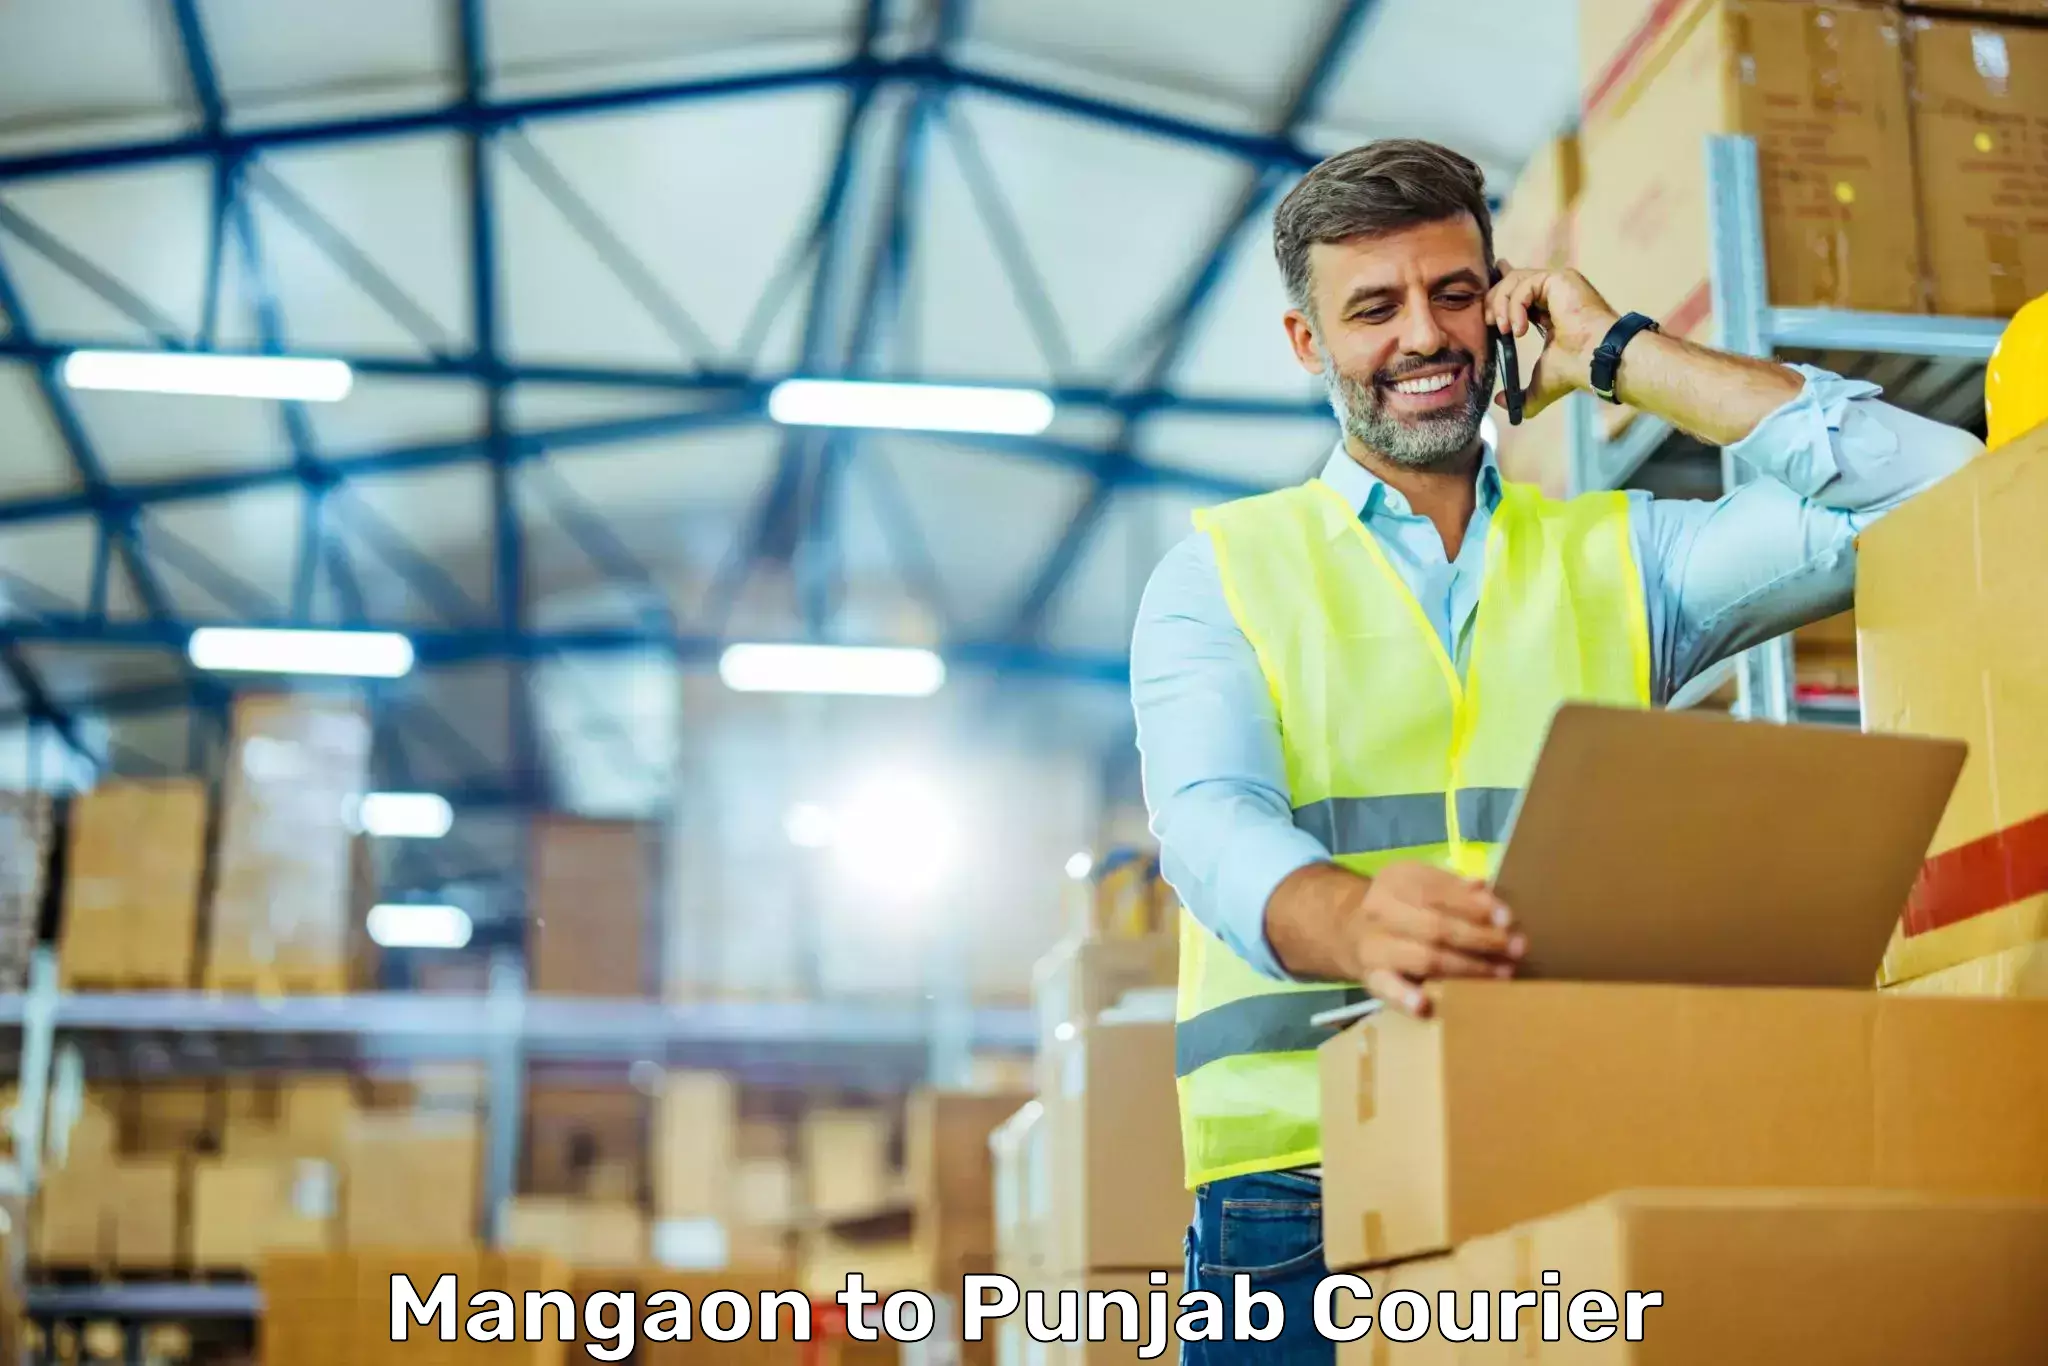 Express delivery capabilities in Mangaon to Malerkotla